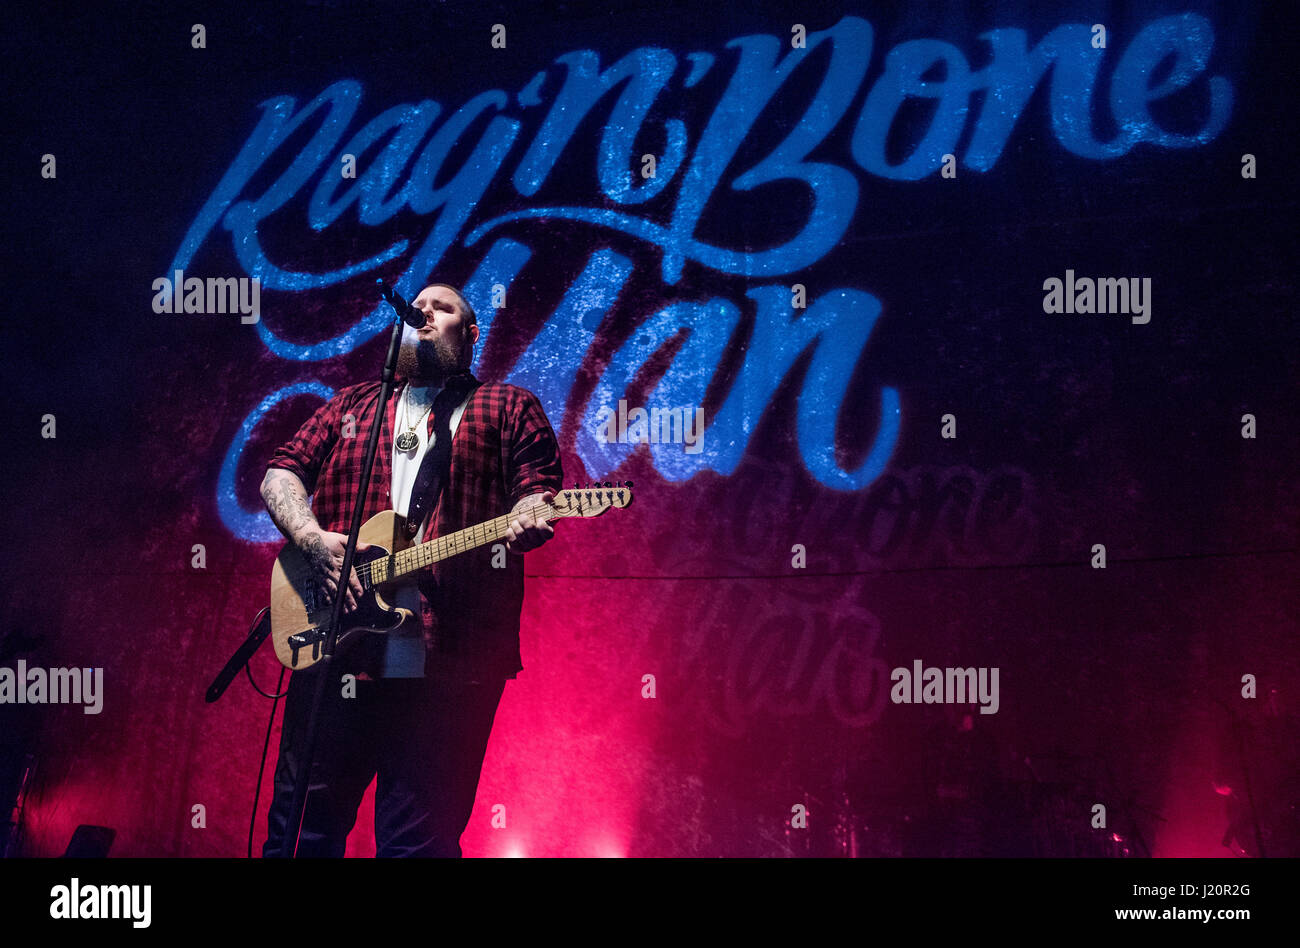 Manchester UK. 22nd April 2017. Rag N Bone Man performs at The Manchester Academy, Manchester UK on his headline sold out UK tour 2017, Manchester 22. Stock Photo